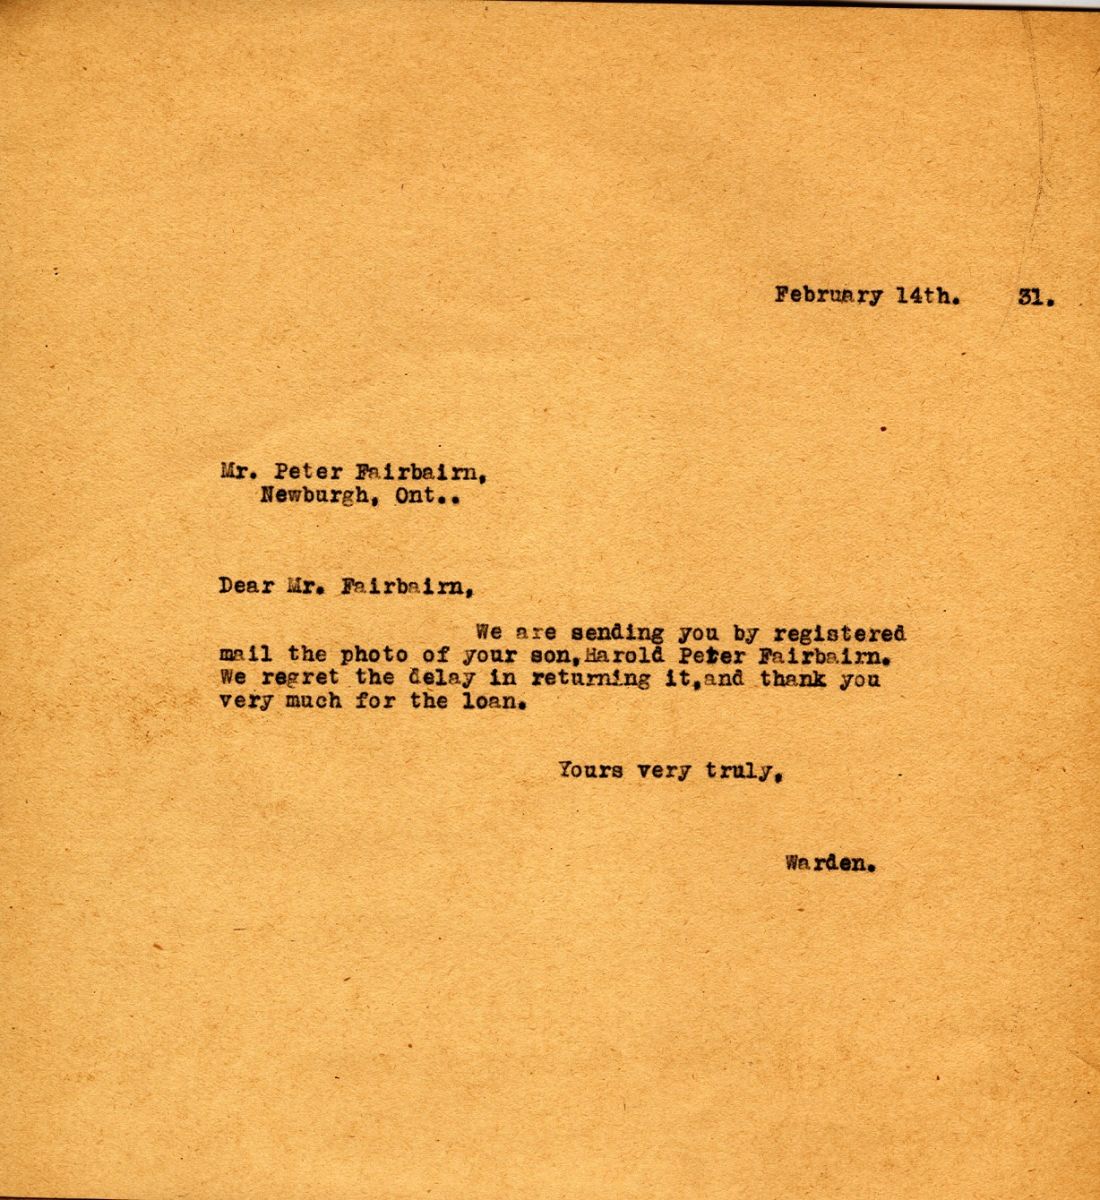 Letter from the Warden to Peter Fairbairn, 14th February 1931